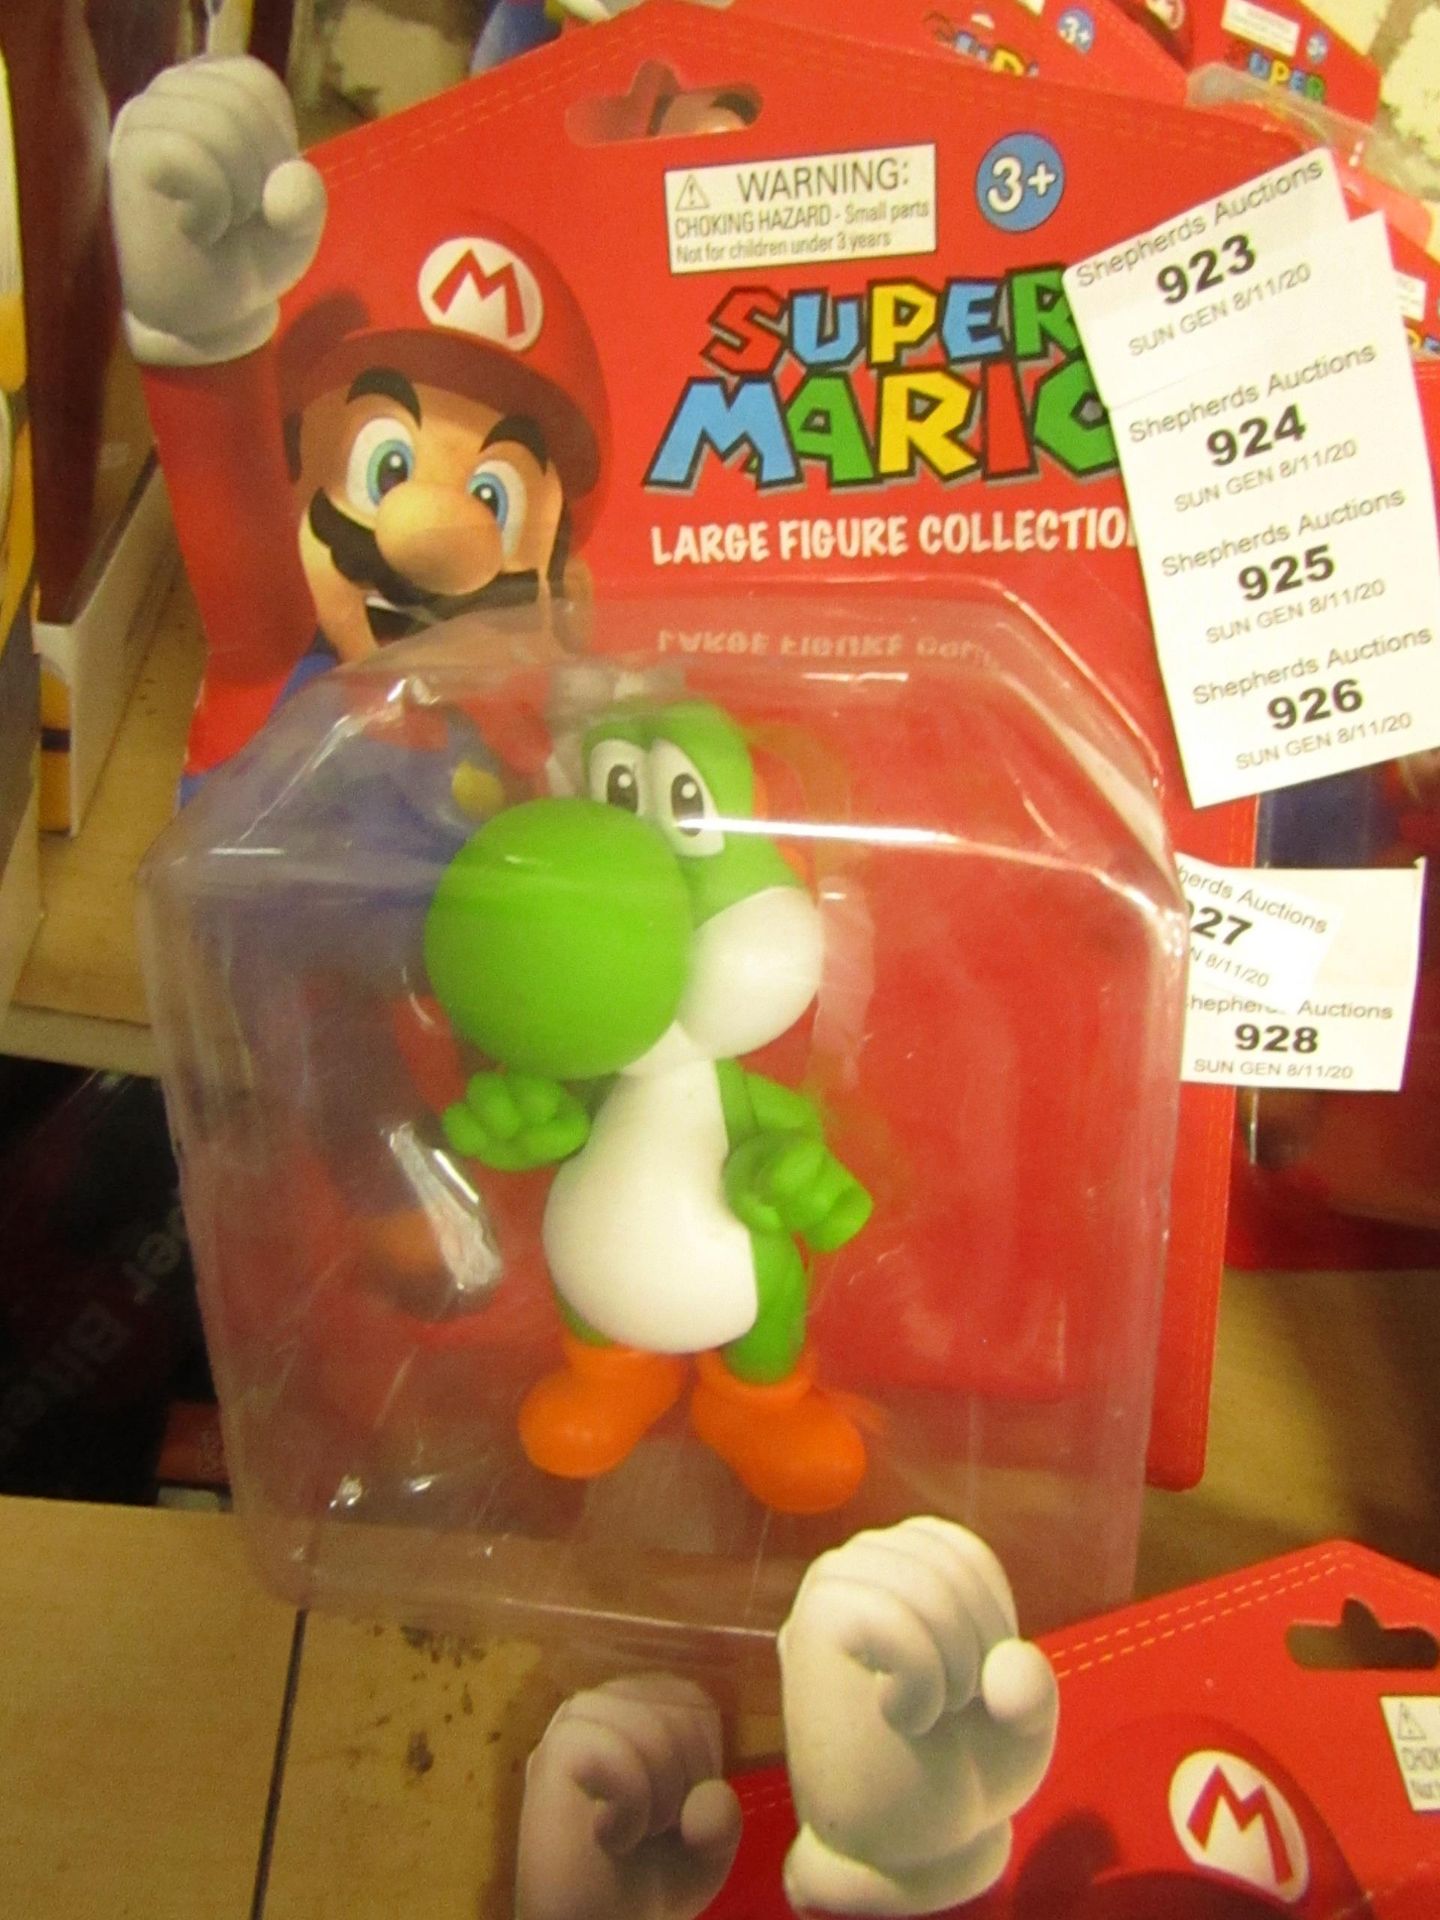 Super Mario Large Vinyl Figure. New & Packaged. See Image For Figure